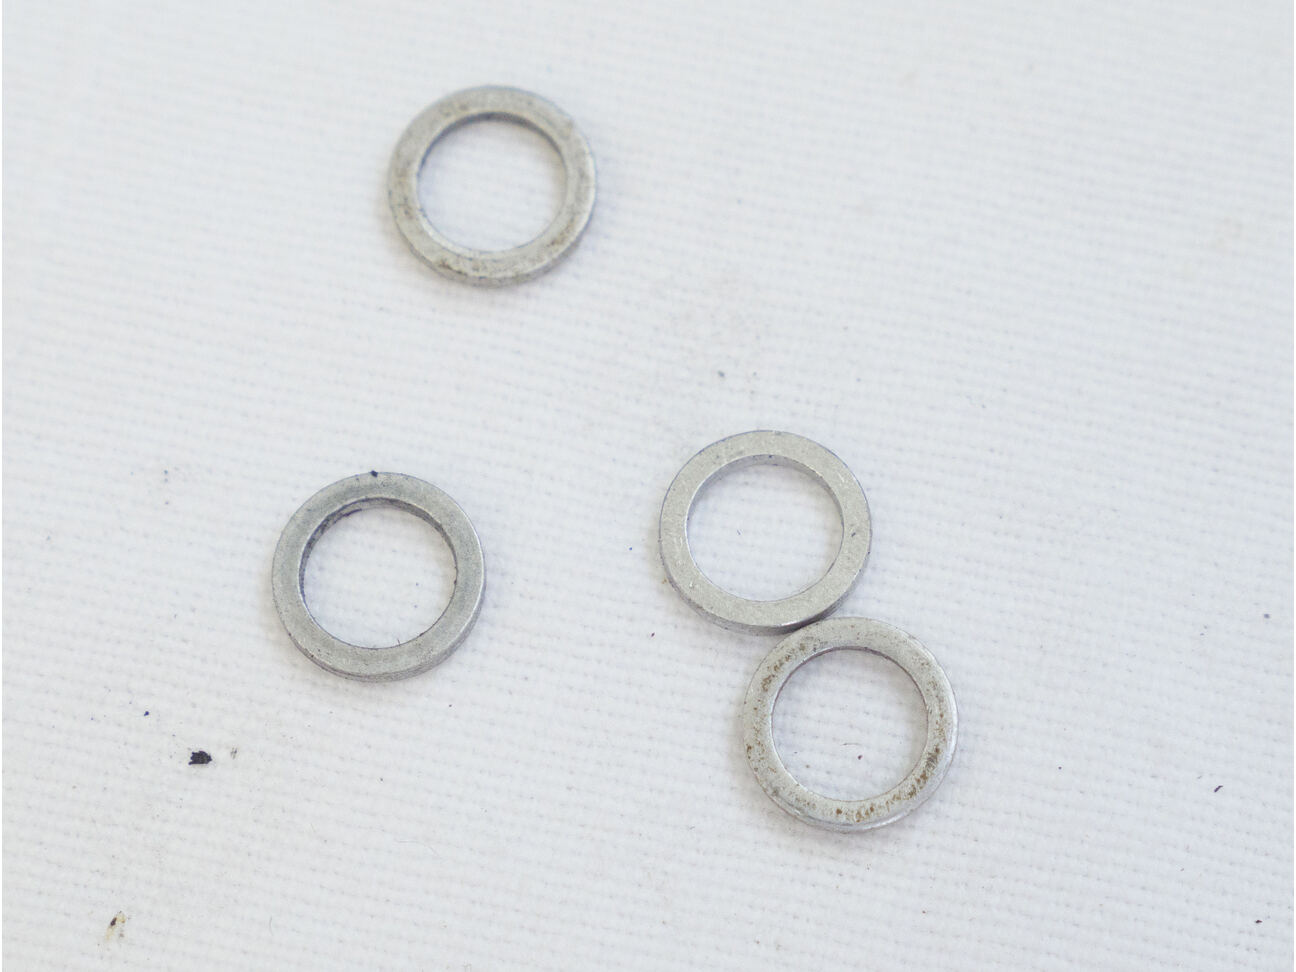 F1 F2 velocity shim washer, one included